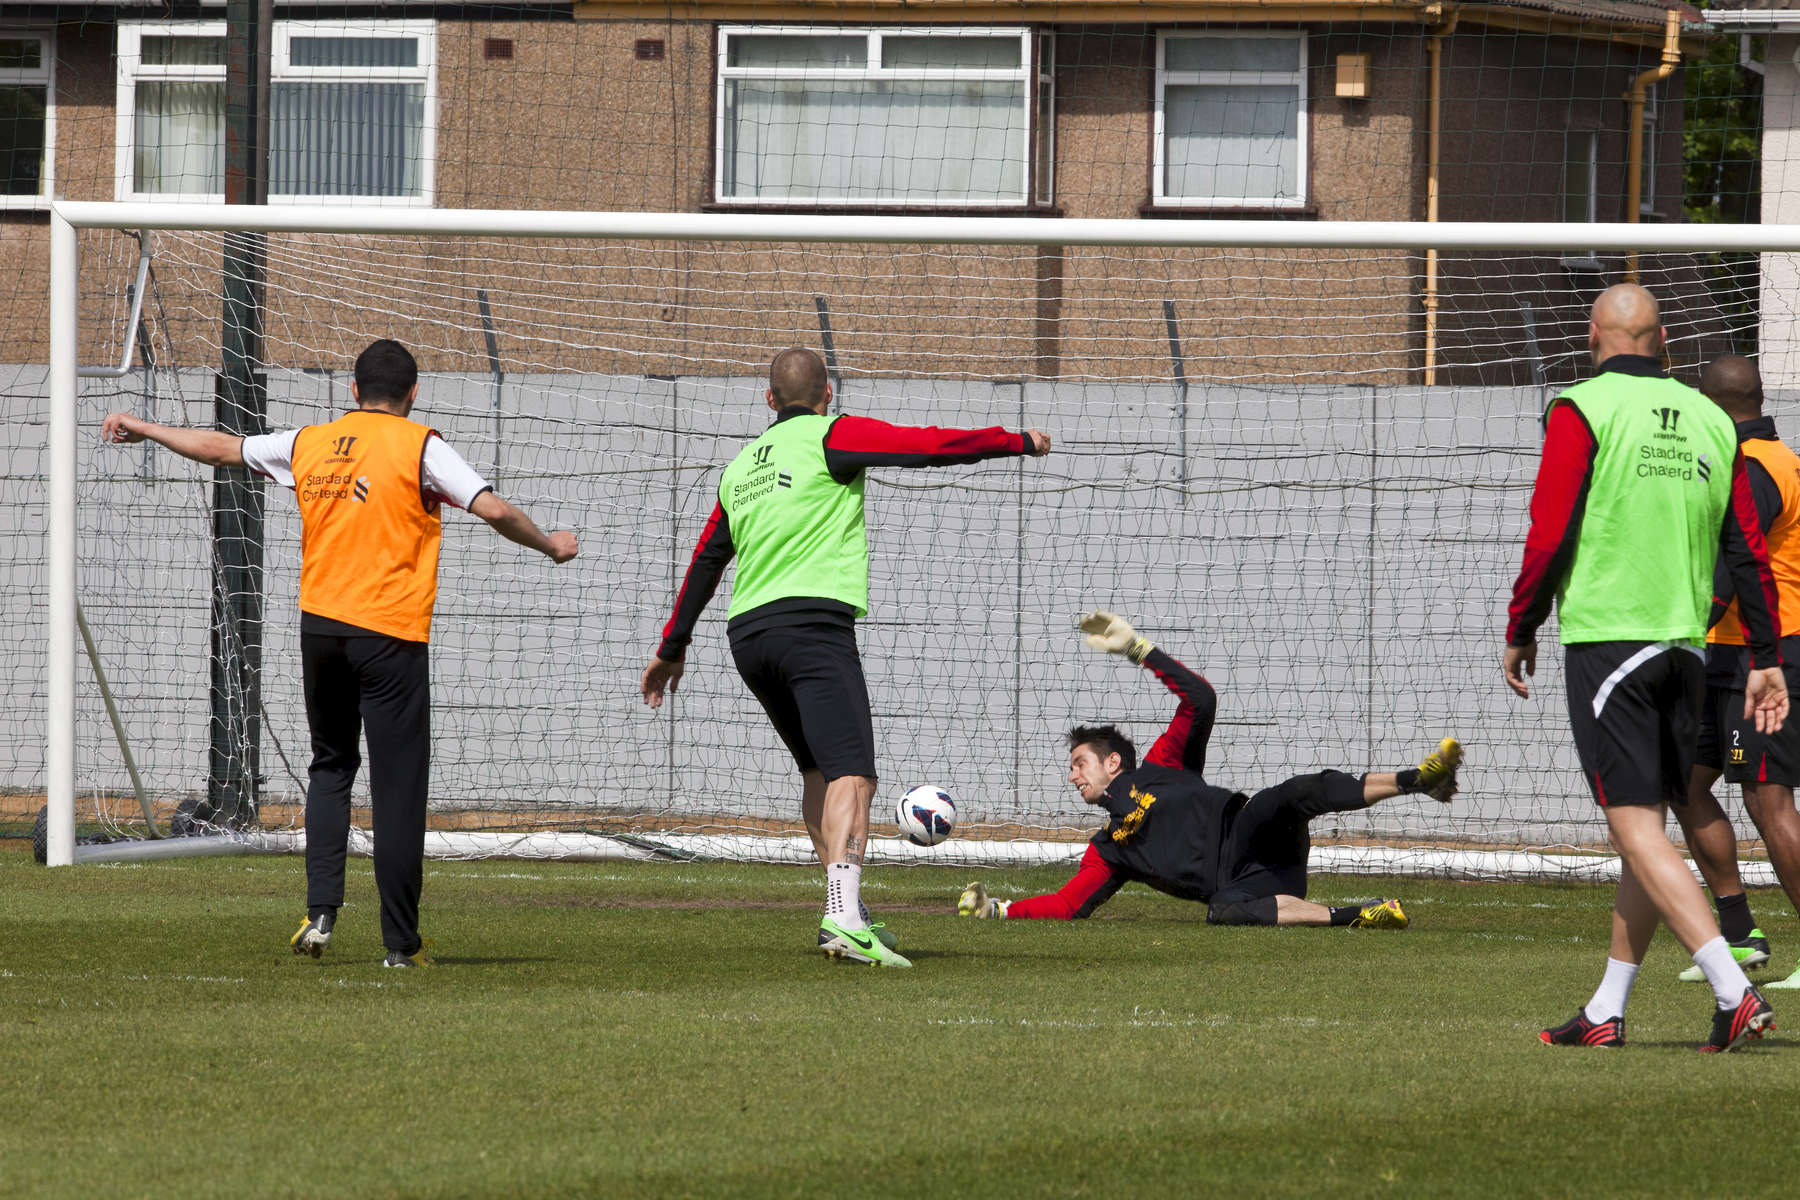 A training goal is scored against Liverpoll FC goalkeeper Brad Jones at the Melwood facility.Melwood is the Liverpool FC training ground, located in the West Derby area of Liverpool. It is seperate from the Liverpool Academy, which is based in Kirkby.Melwood was redeveloped in the early 2000′s with large input from then-manager Gerard Houllier and now features some of the best facilities in Europe. It has been the club’s training ground since the fifties and was previously transformed into a top class facility by Bill Shankly.Facilities include sythetic pitches, rehabilitation rooms, press and meeting rooms, gymnasium, swimming pool, restaurant and recreational facilities.